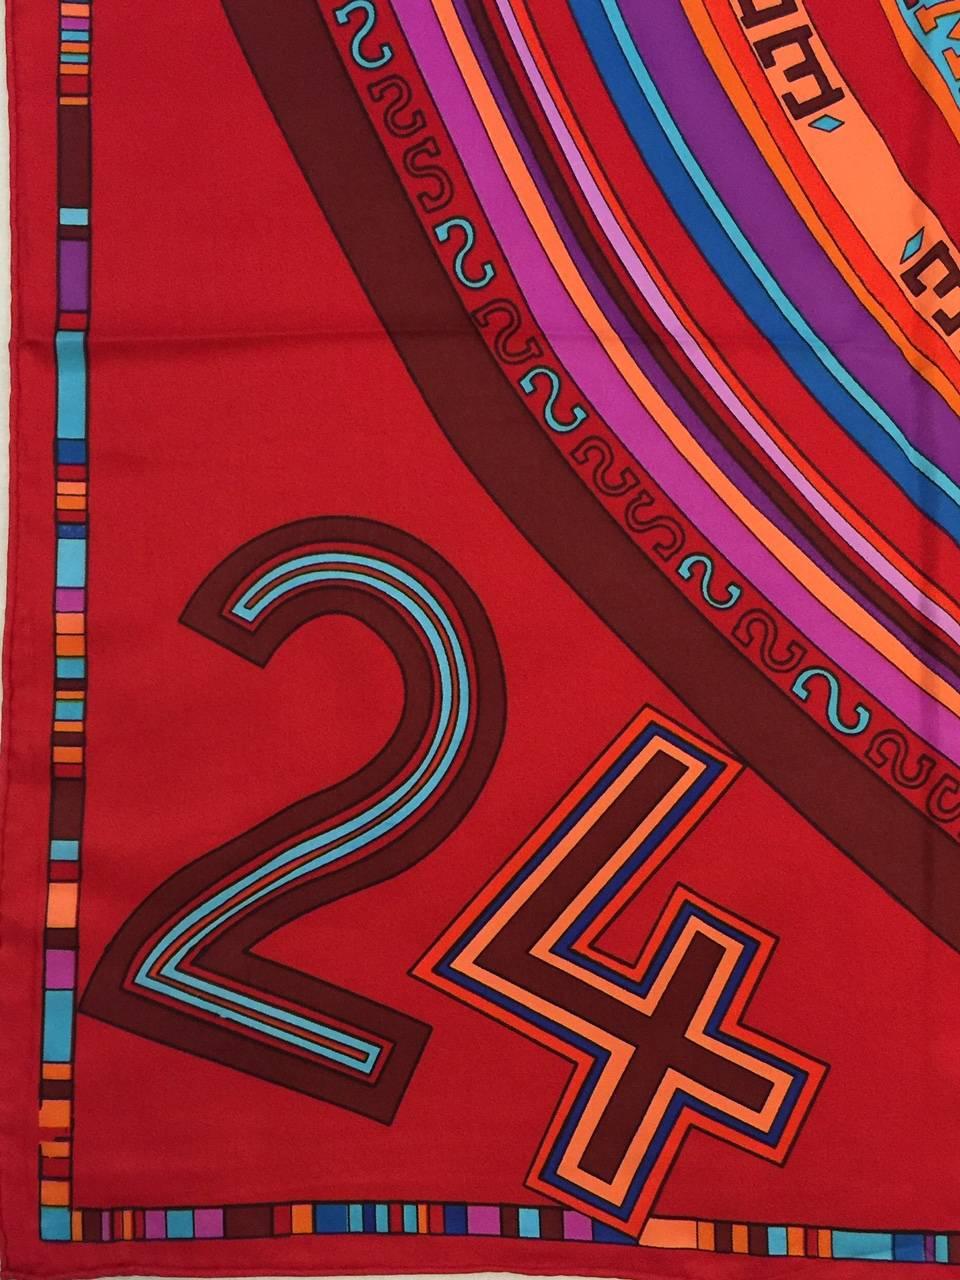 Hermes Red Multi-Color Tohu Bohu Giant Silk Twill Carre was introduced in 2004 by Artist Claudia Stuhlhofer-Mayr.  Since then, it has become highly desired and coveted by connoisseurs and collectors of all things Hermes!  The bold red colorway is as